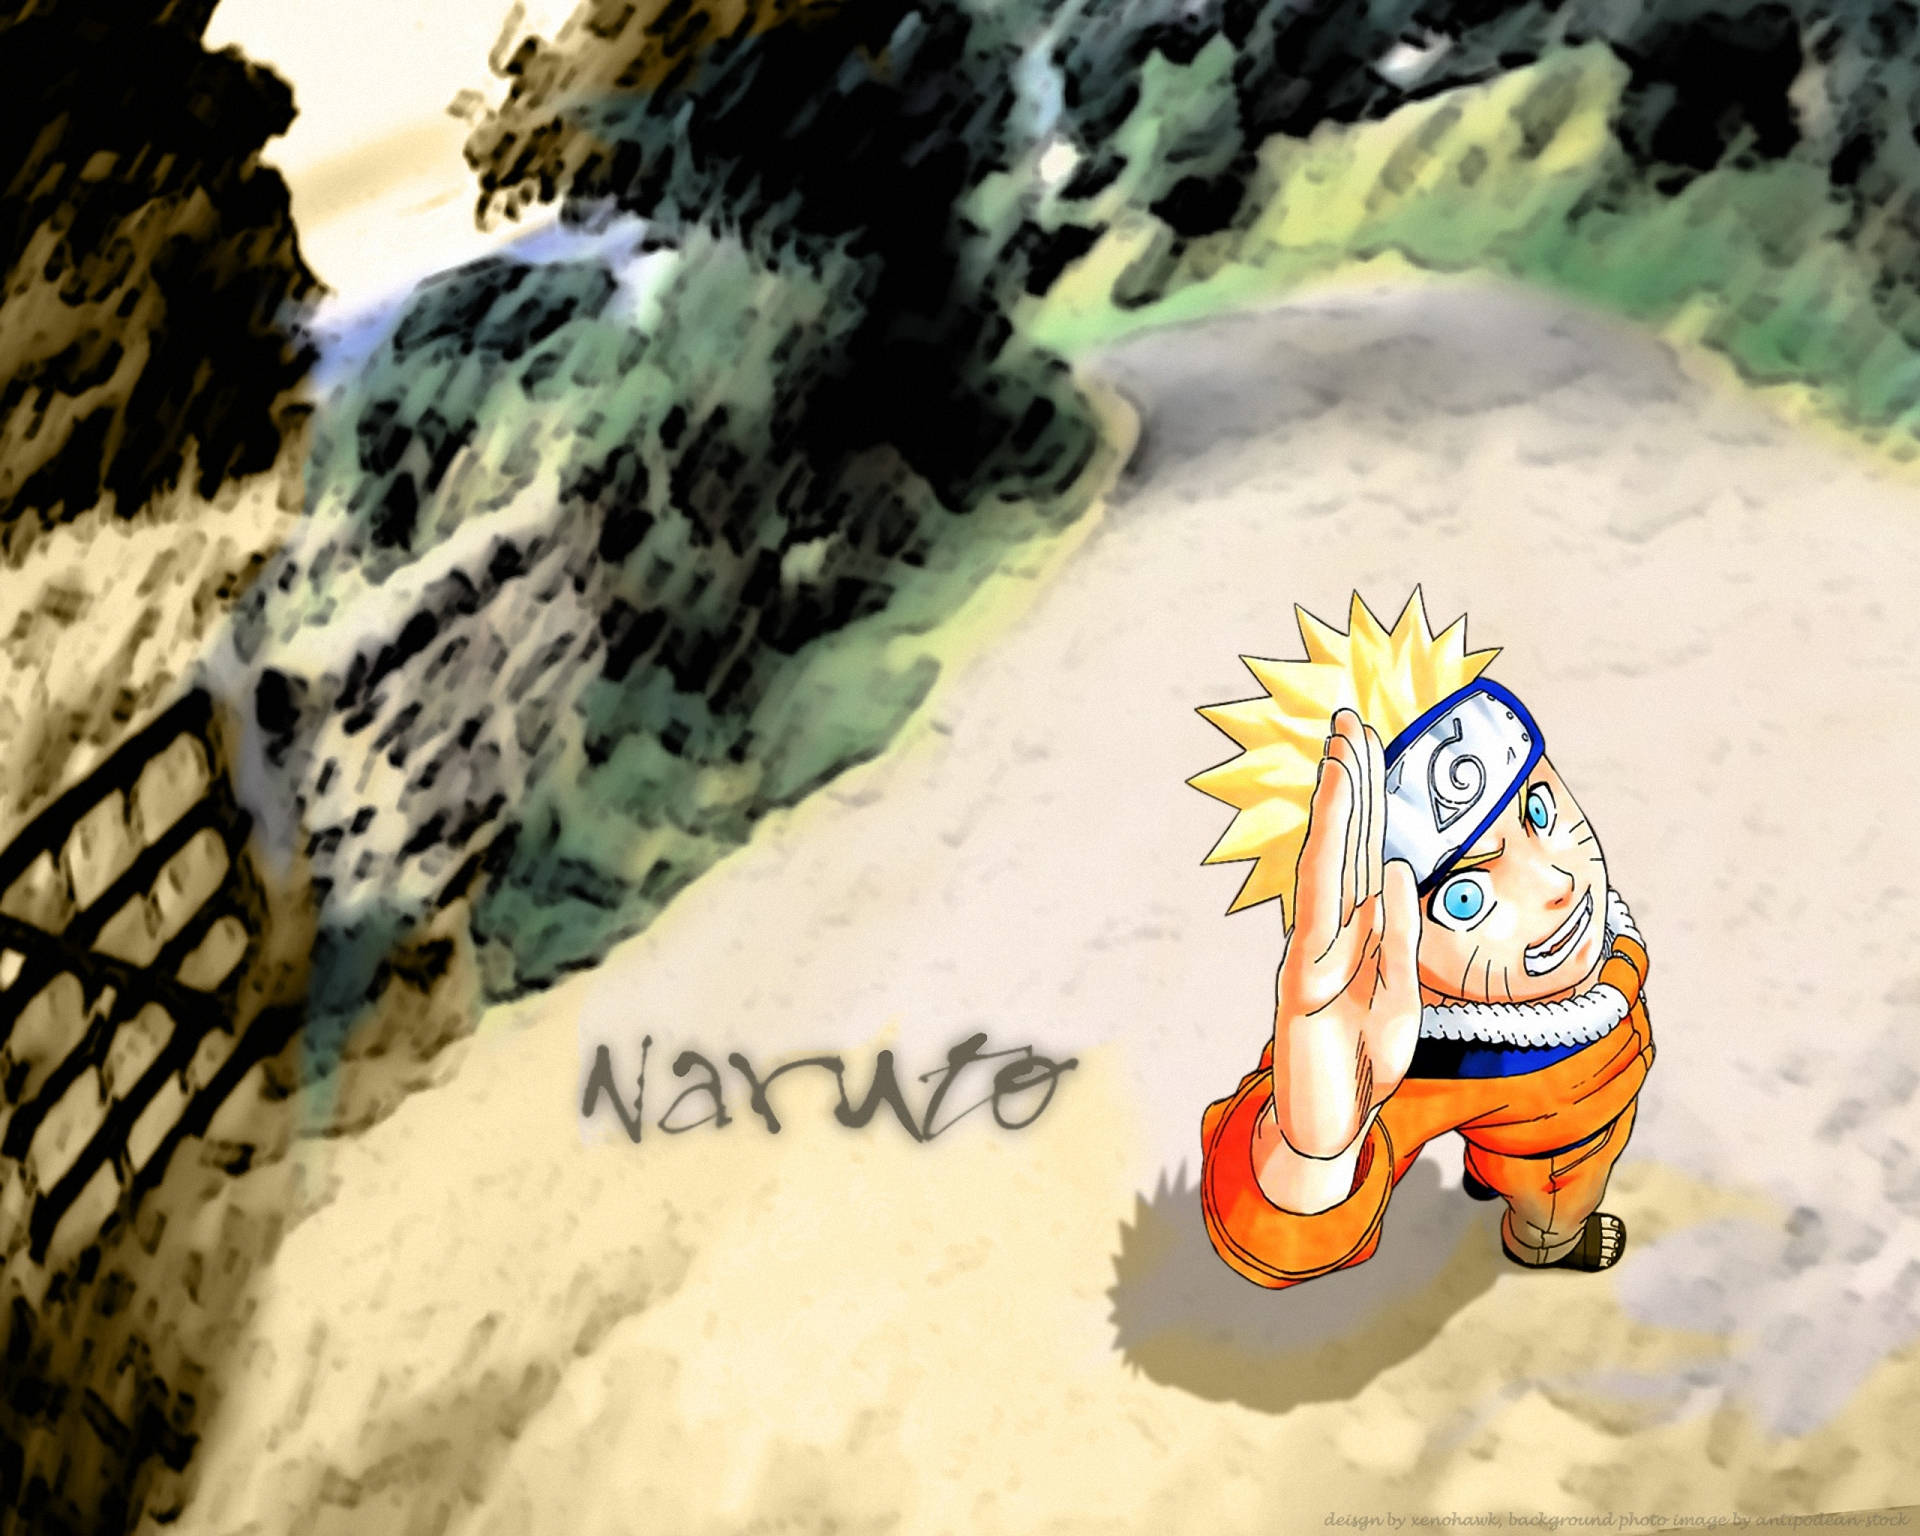 Moving Naruto Salute Background